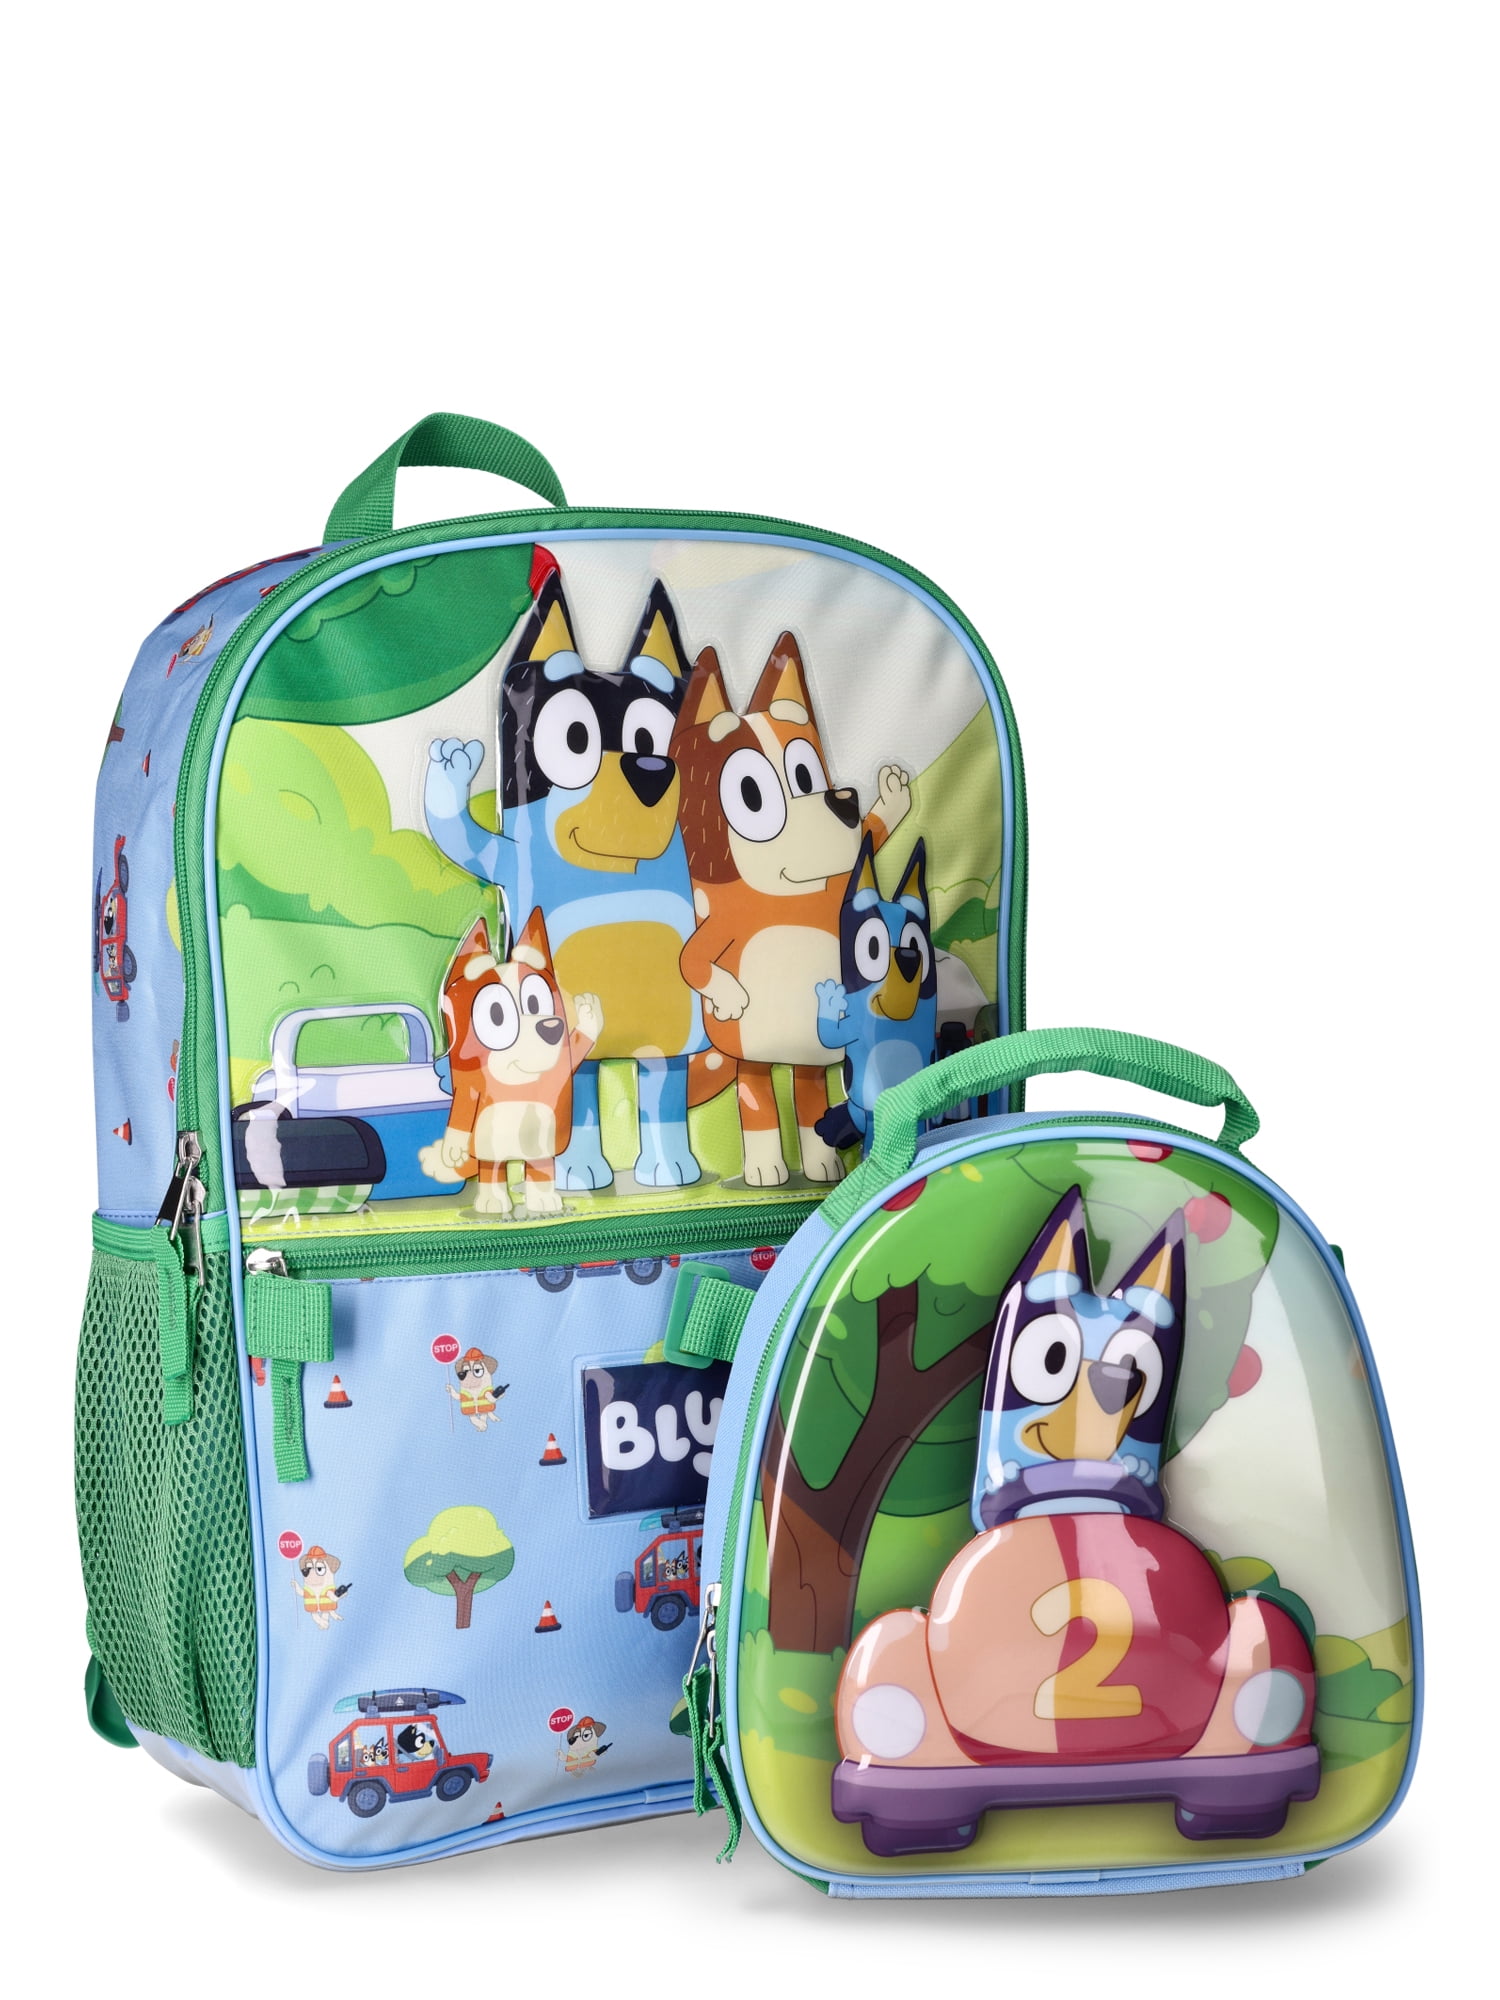 BBC Bluey Family Trip Children's Laptop Backpack with Lunch Bag, 2-Piece  Set 